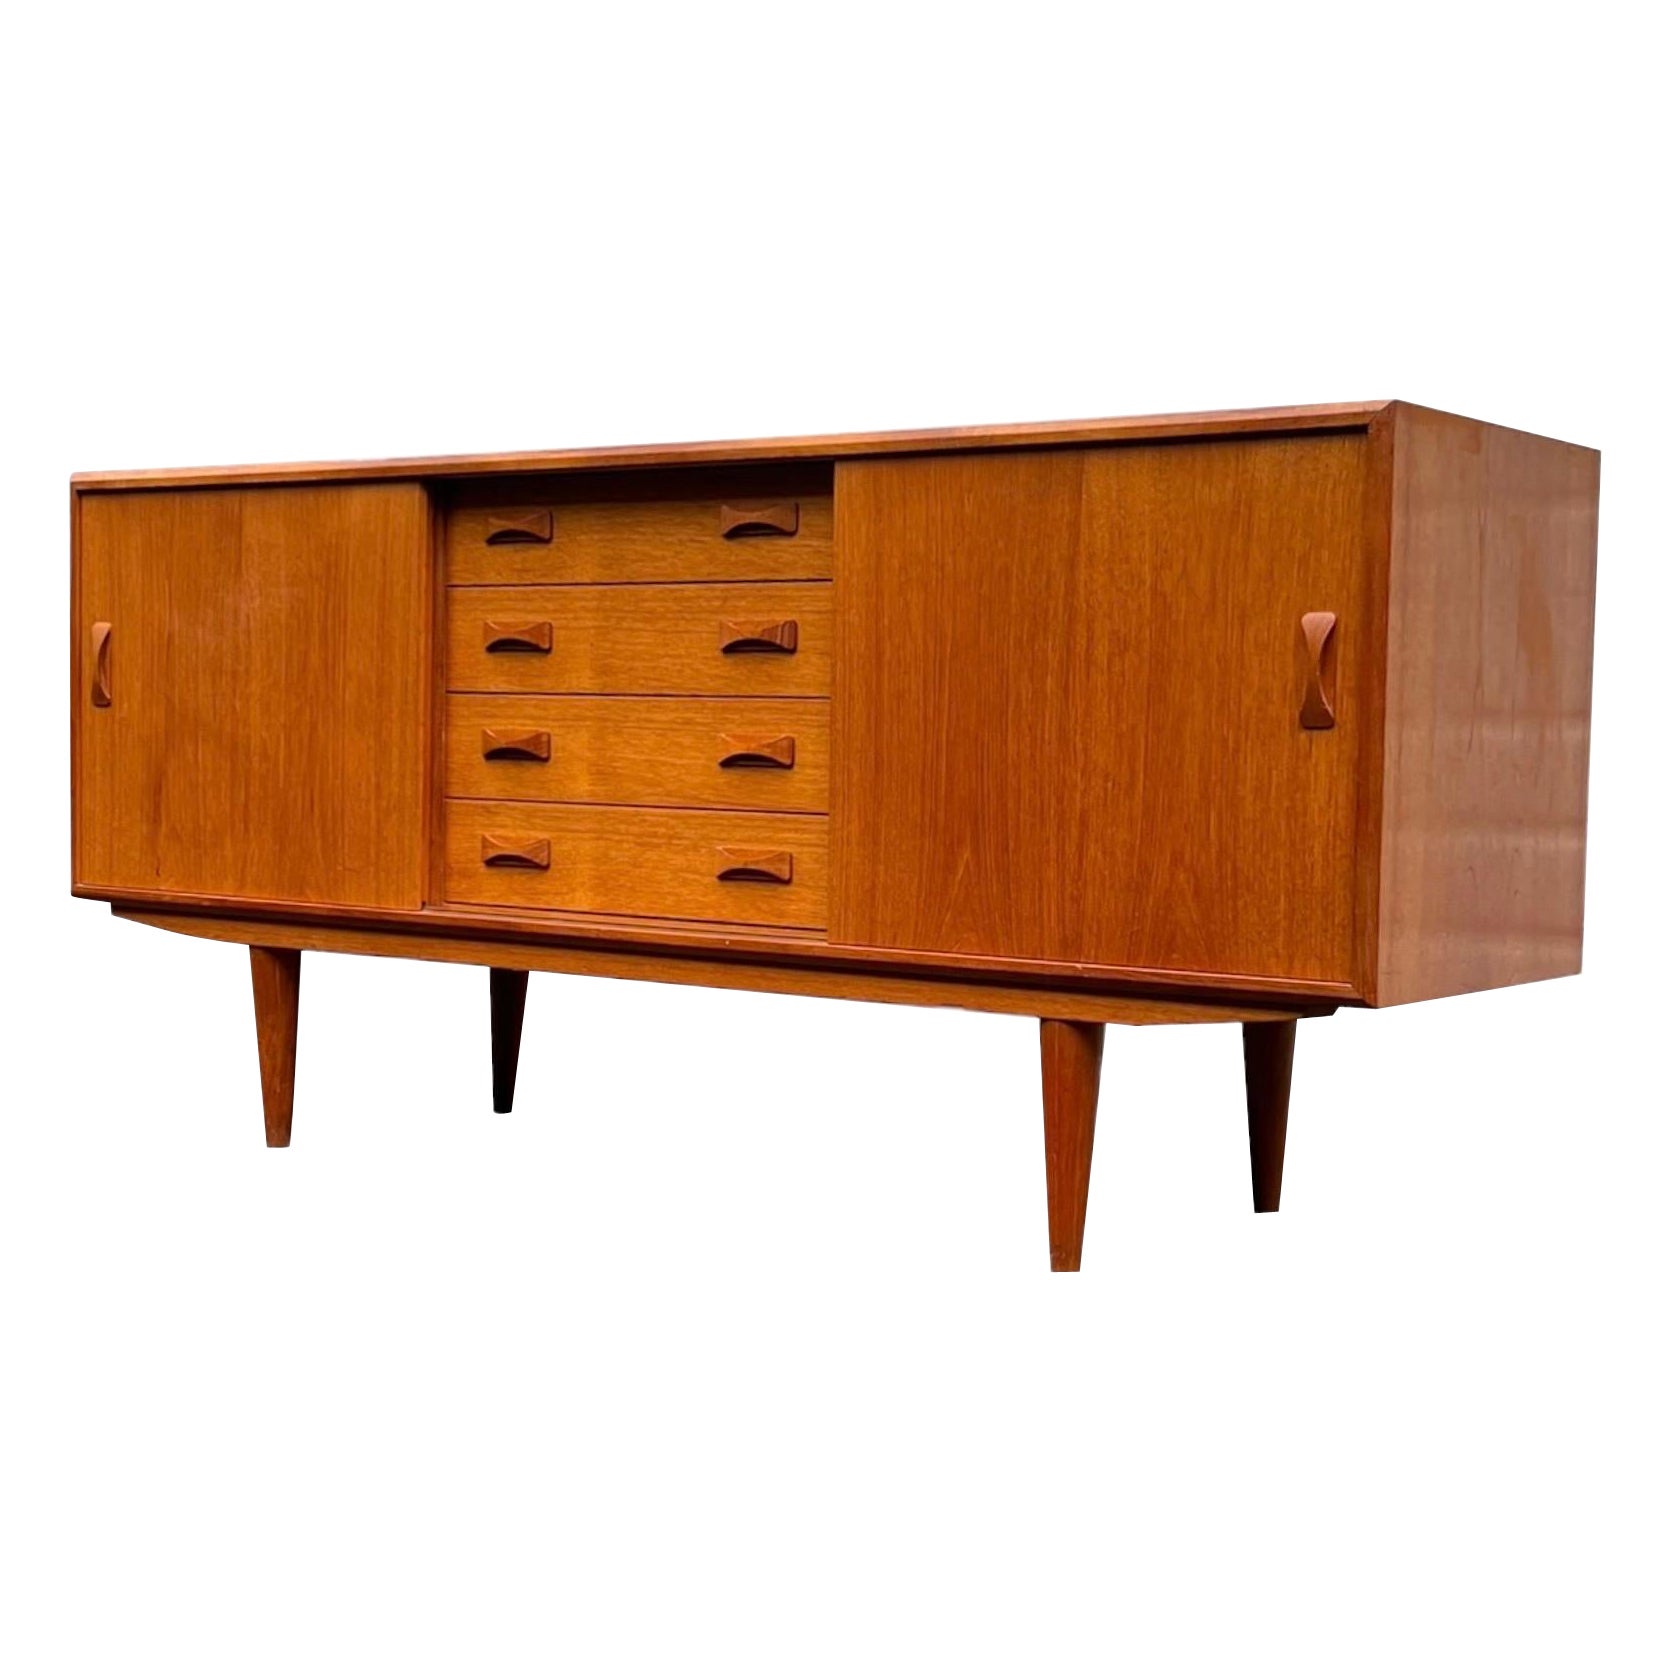 Vintage Danish Mid-Century Modern Credenza by Clausen and Sons Dovetail Drawers For Sale